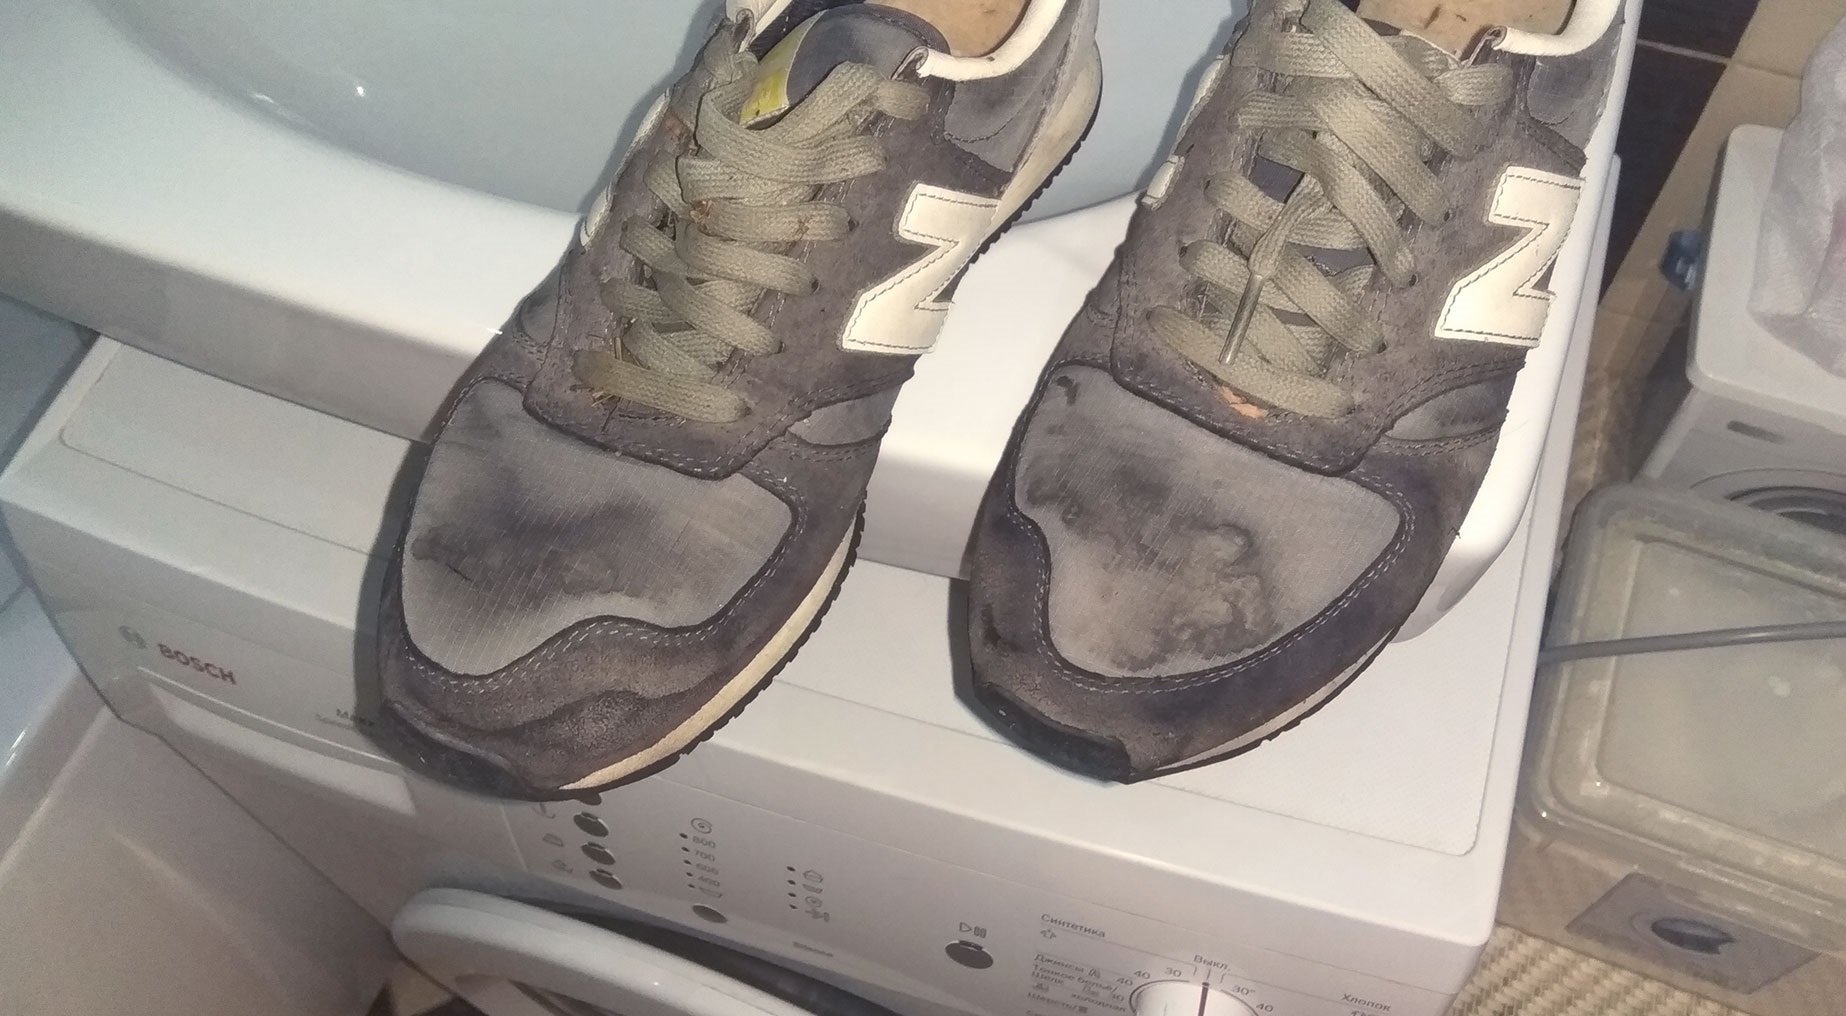 won't the machine ruin suede sneakers?